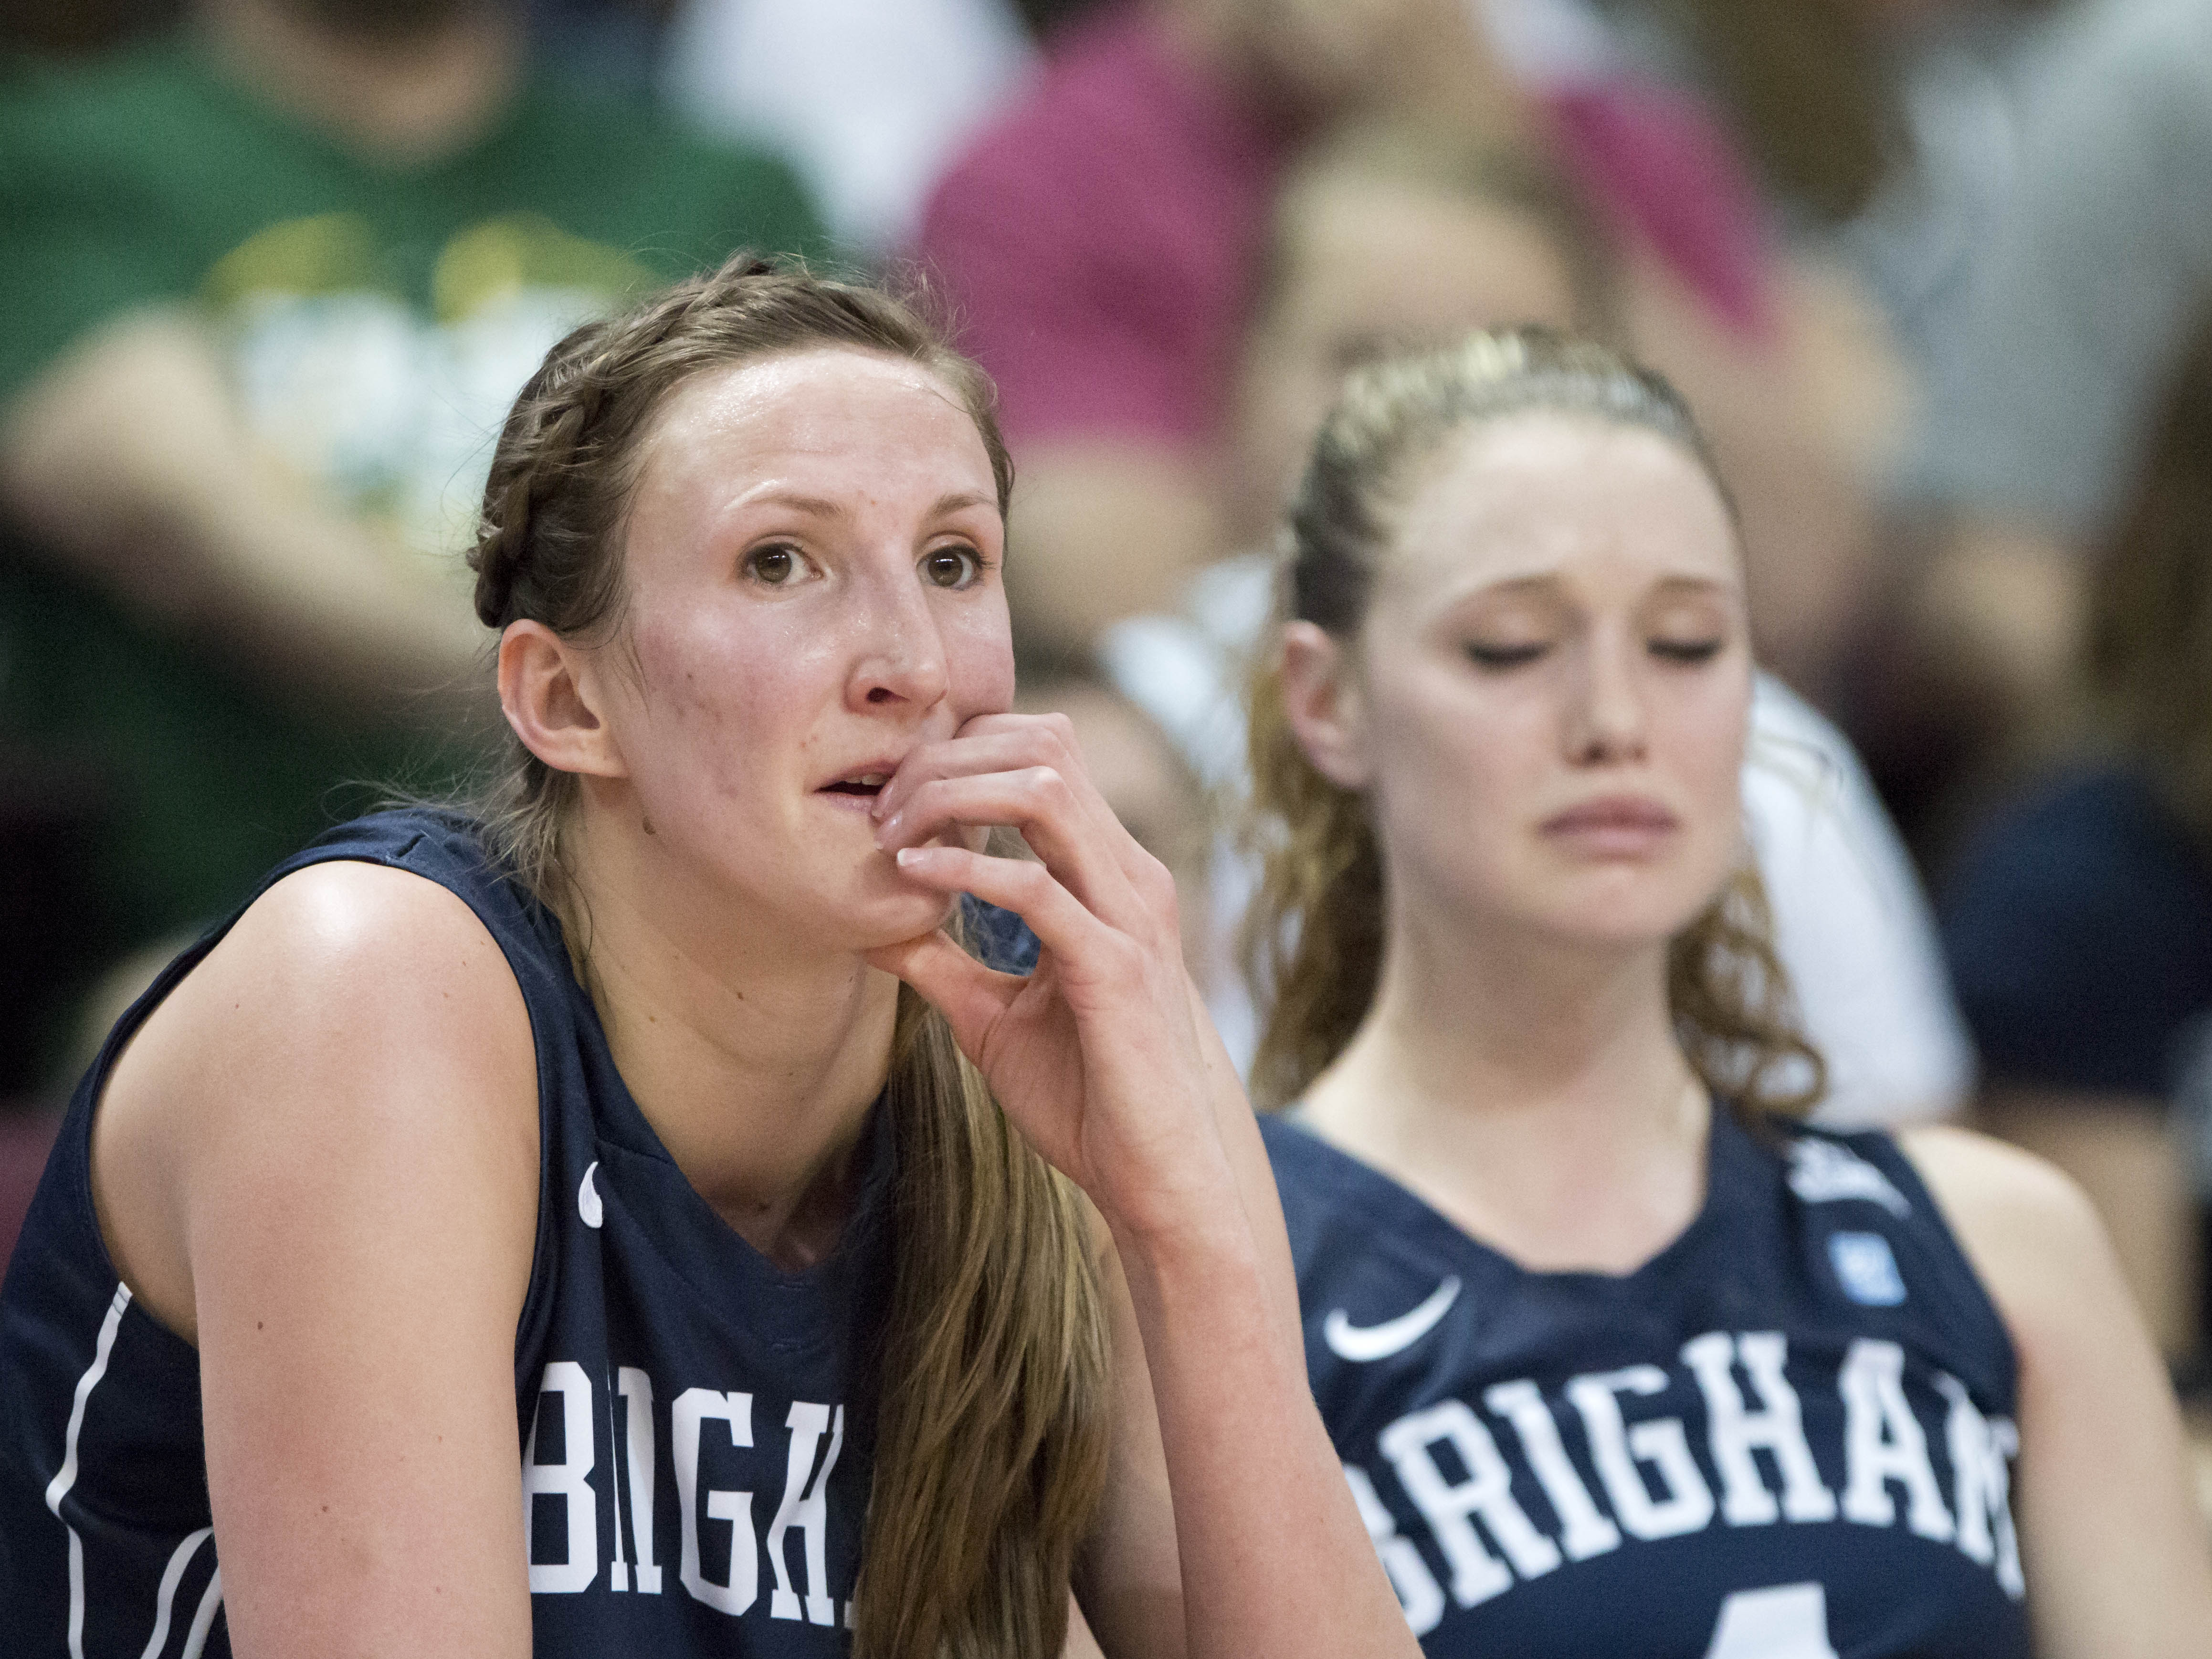 Byu Women Fall In Scoring Hole Lose To Gonzaga In Wcc Championship